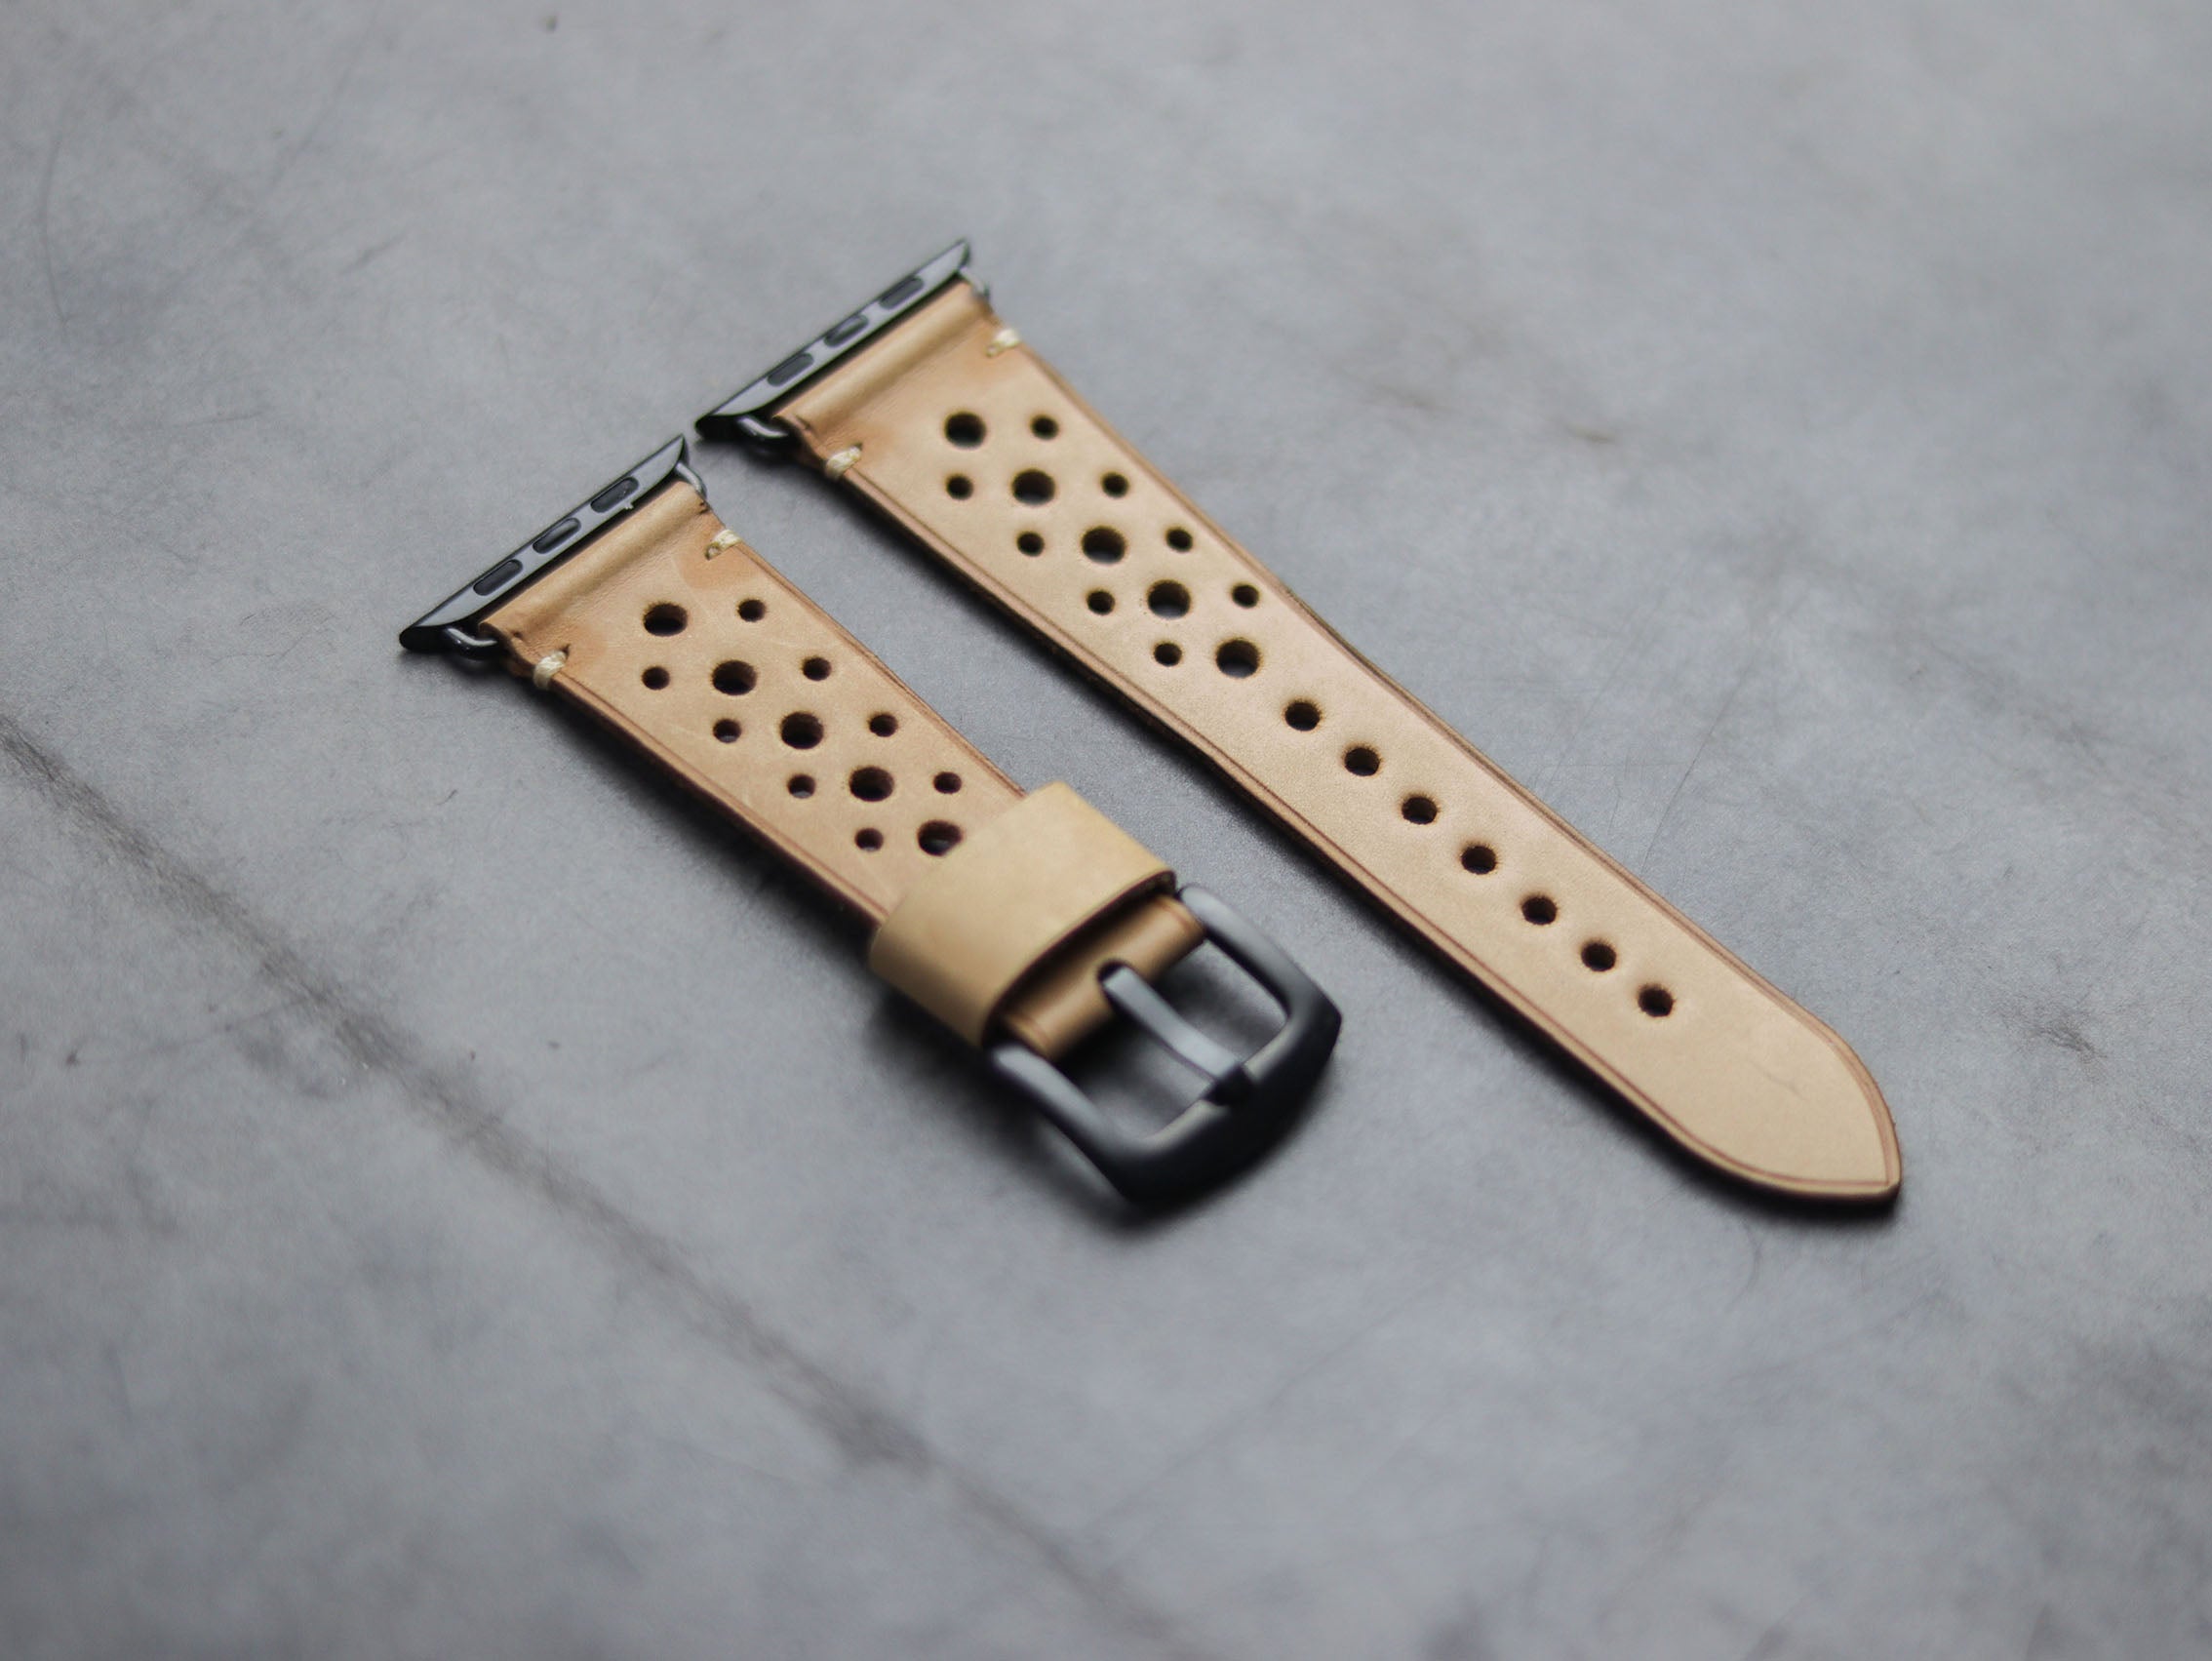 NATURAL BUTTERO RALLY HAND-CRAFTED APPLE WATCH STRAPS